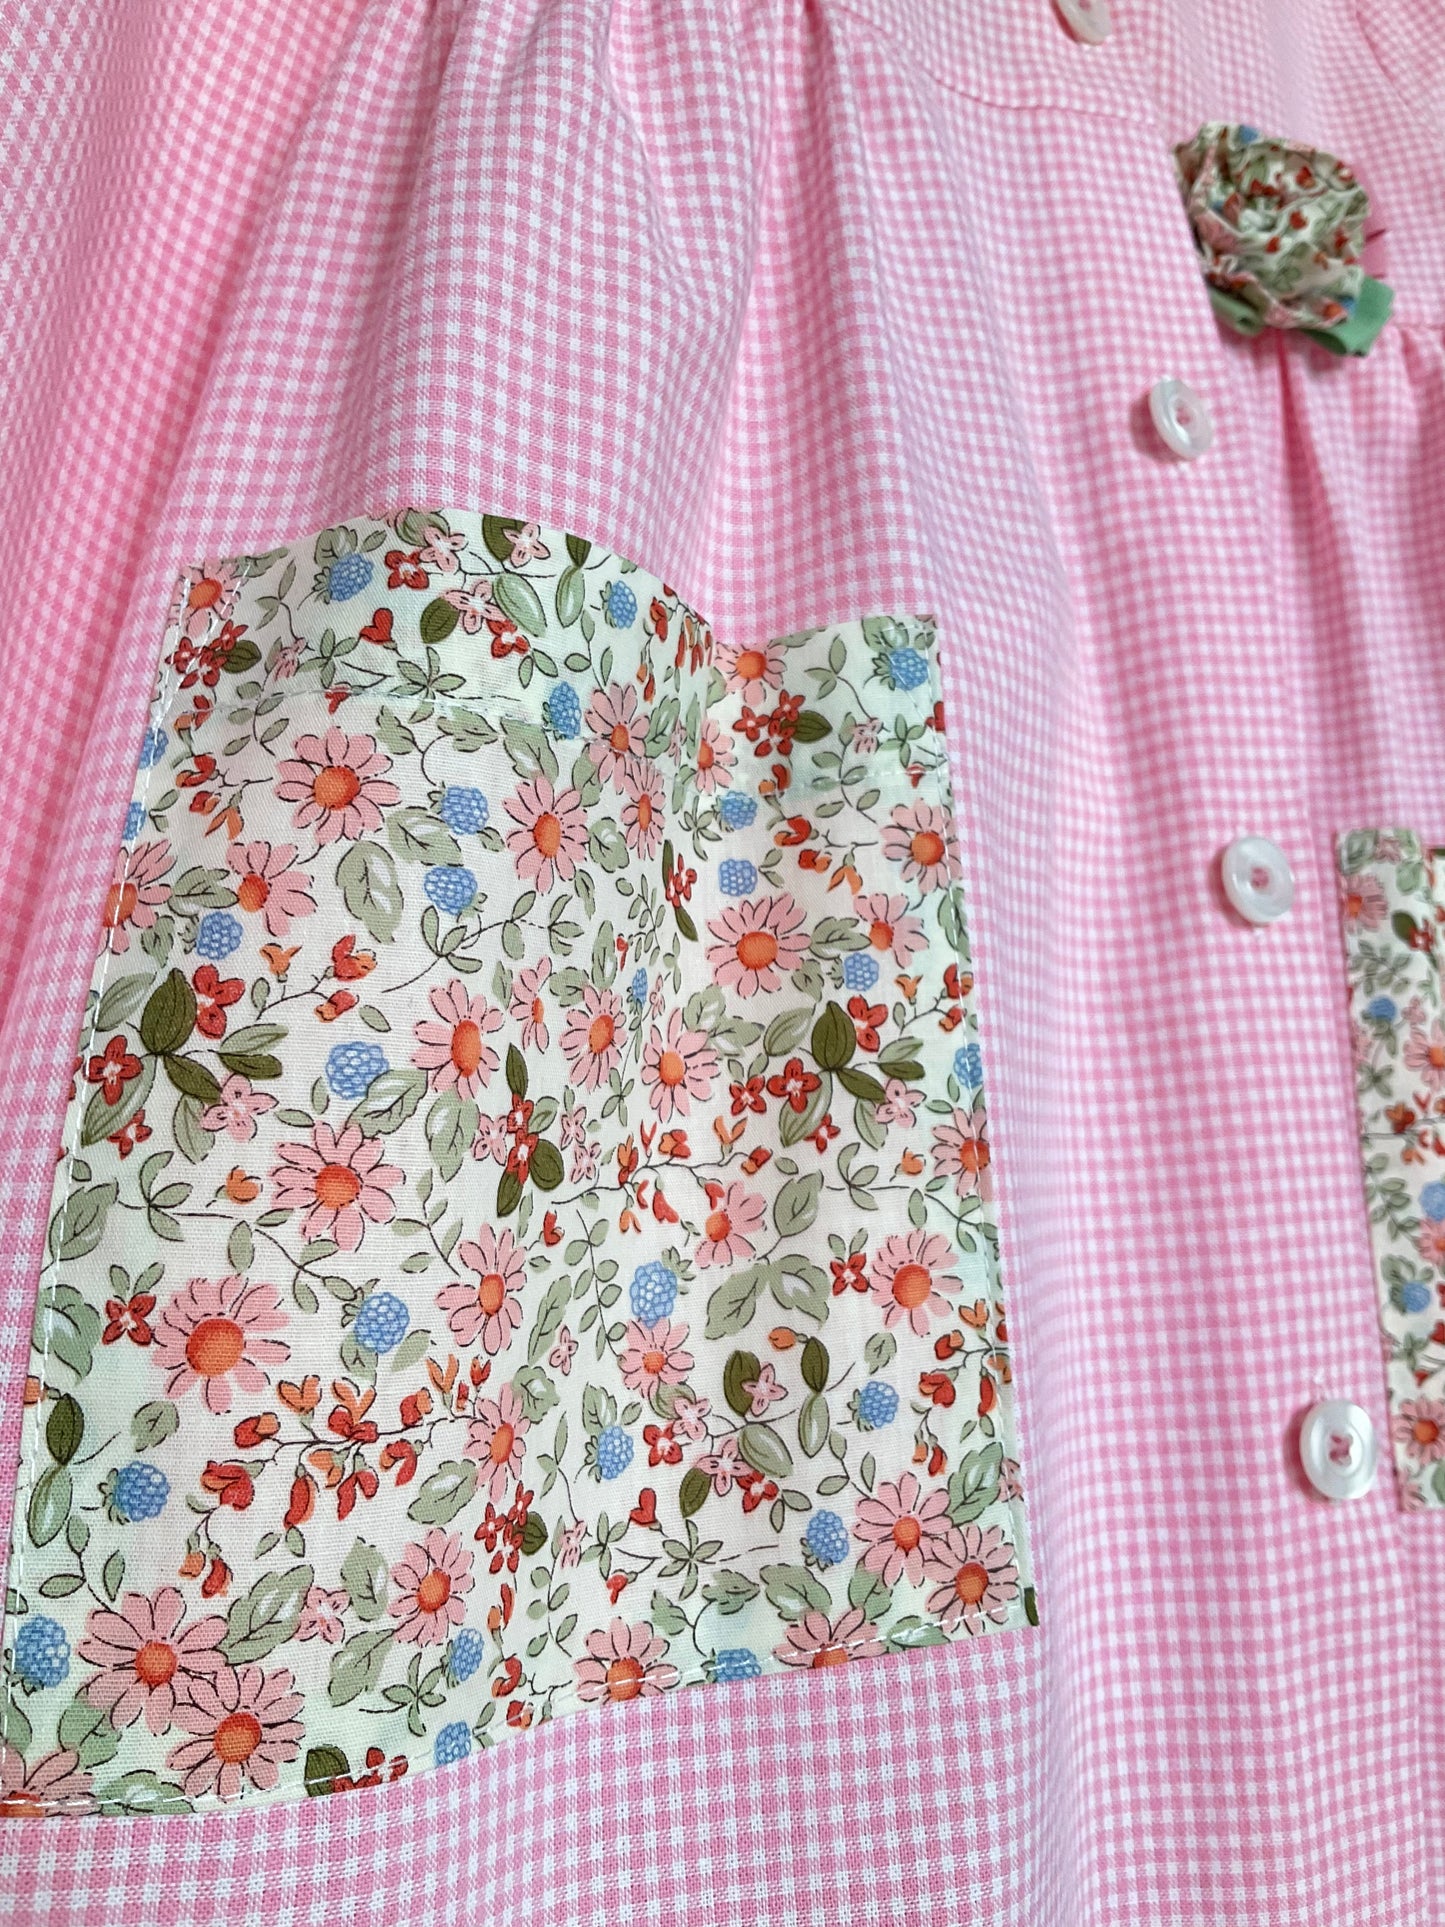 The apron of flowers - Pink checkered apron for kindergarten with pockets with flowers